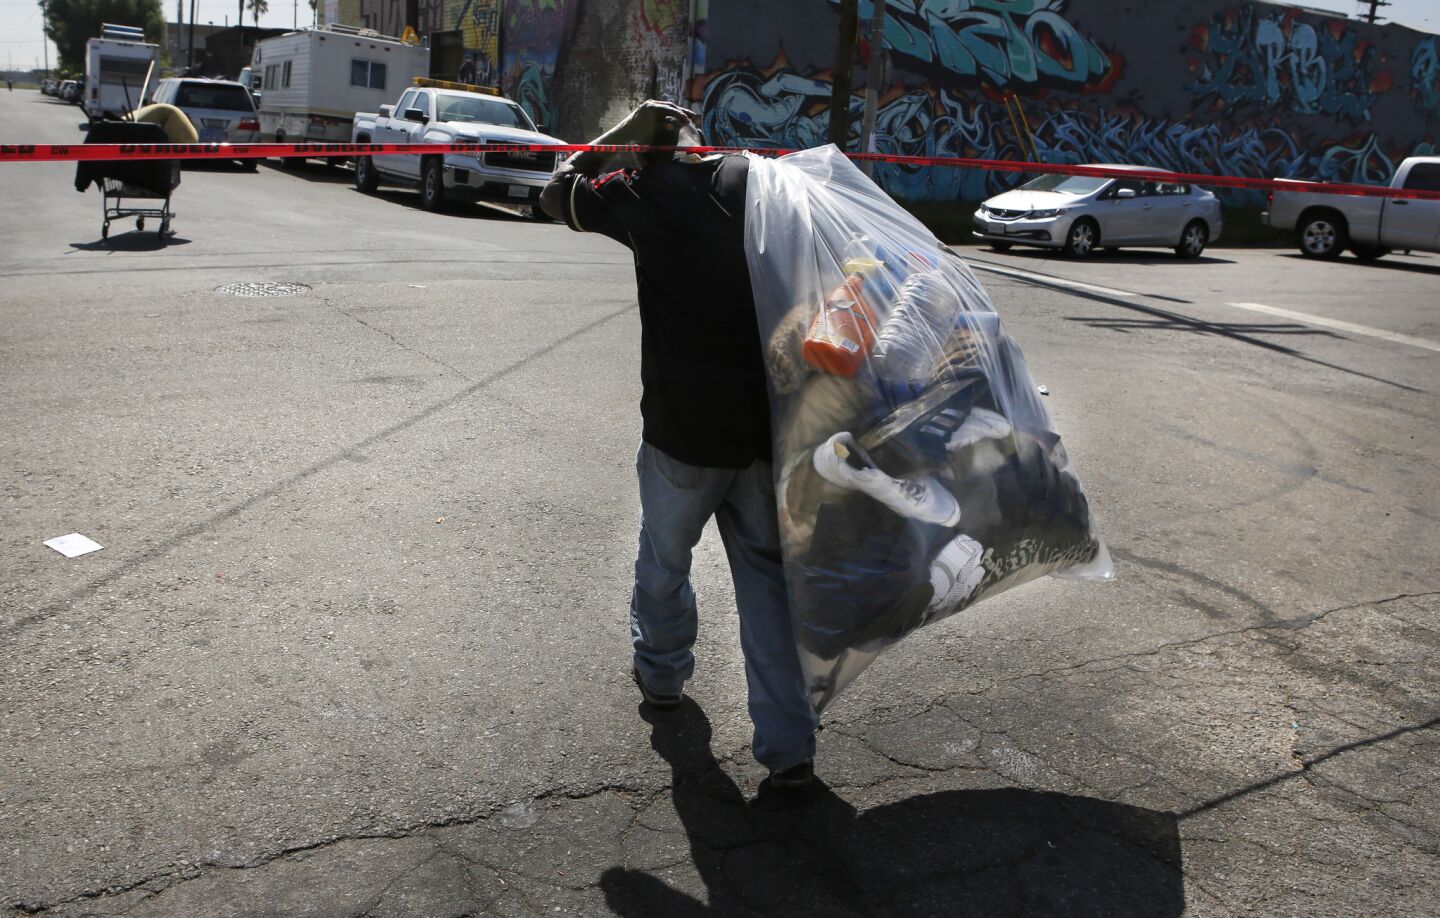 A man leaves a homeless encampment area with his belongings in a bag in Los Angeles.